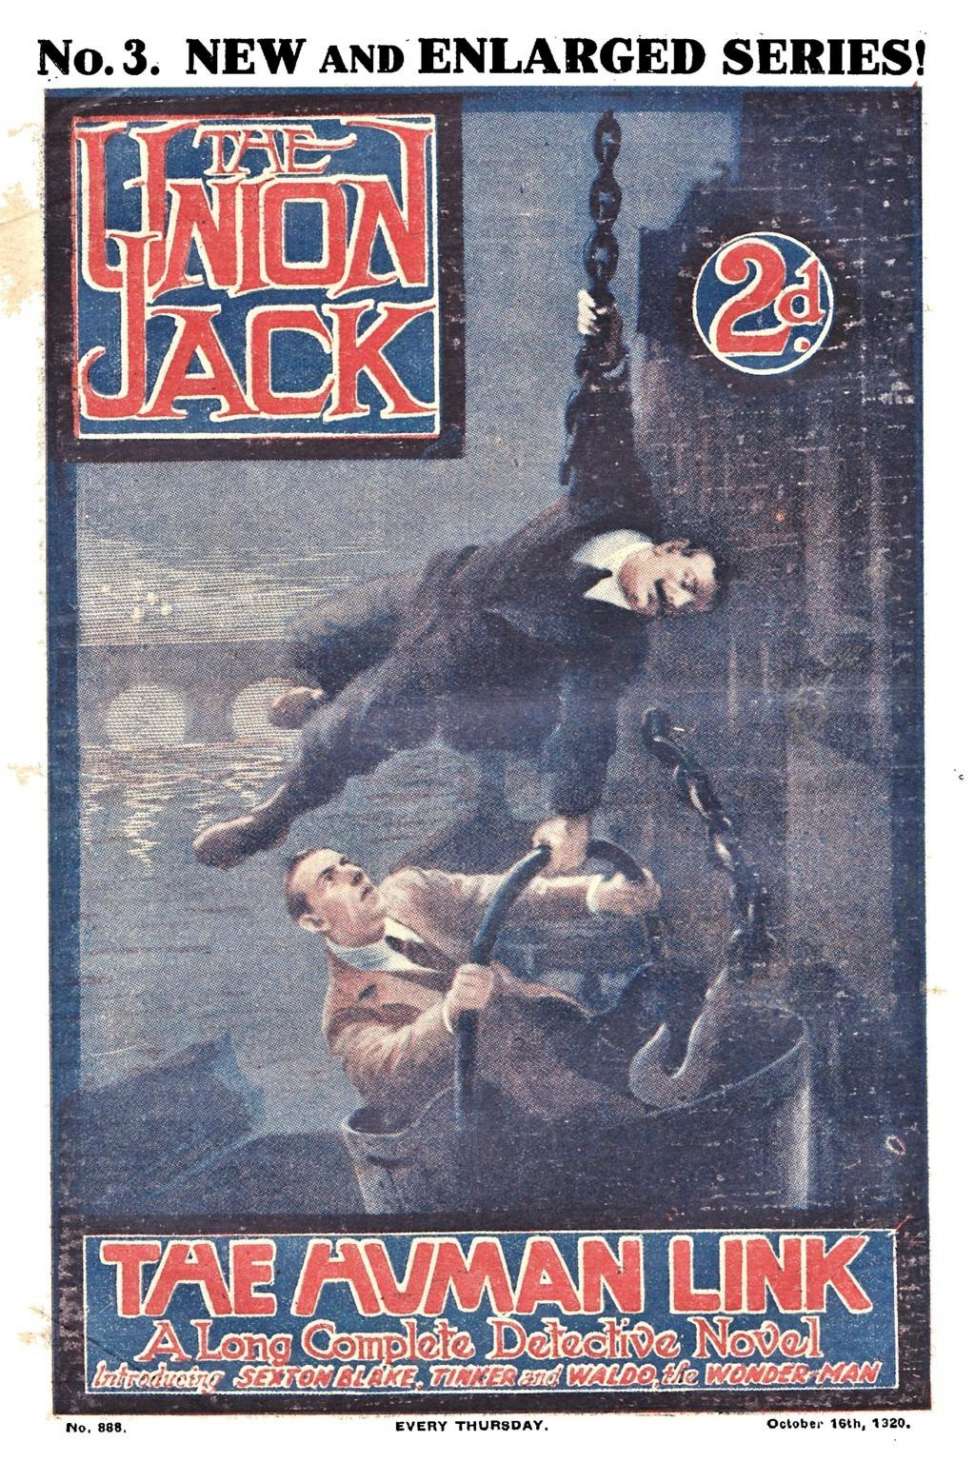 Comic Book Cover For Union Jack 888 - The Man in the Smoked Glasses